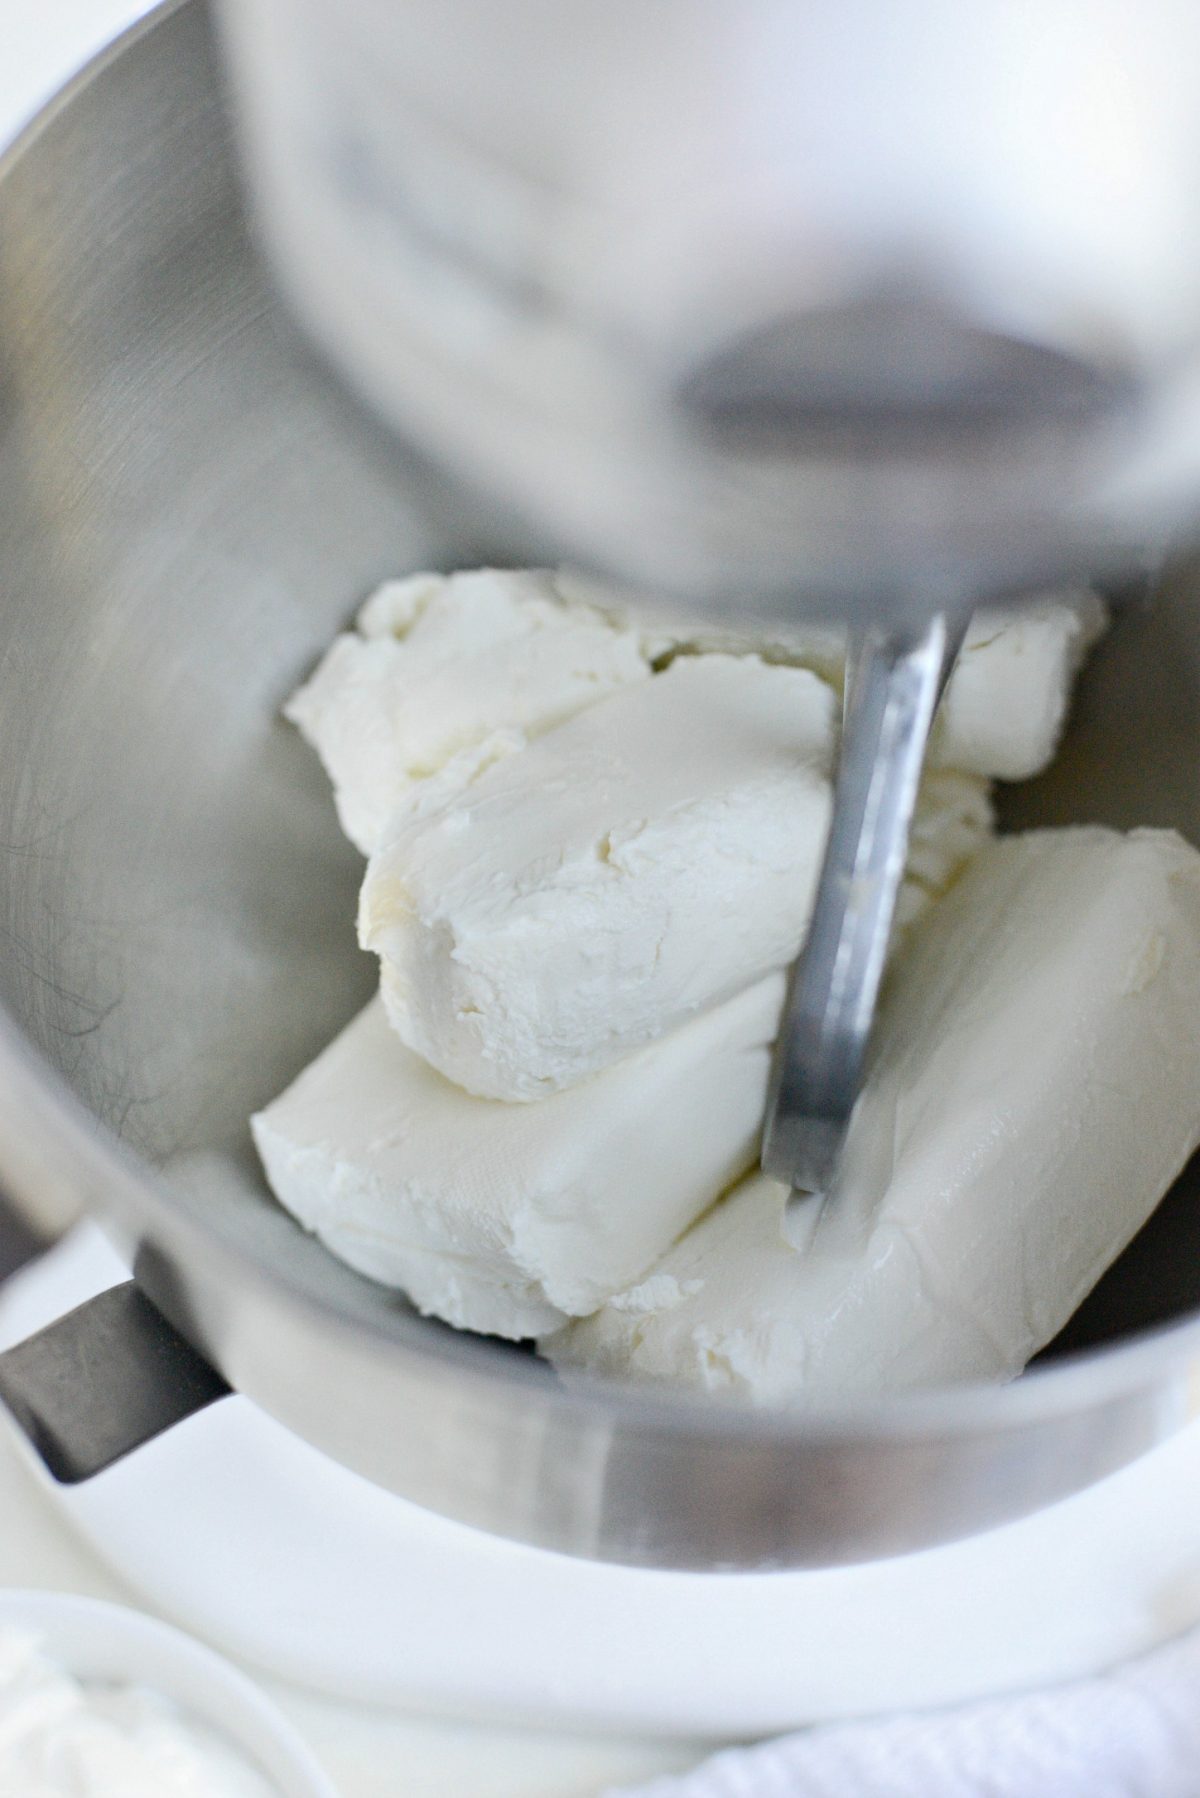 Add cream cheese and goat cheese to bowl of stand mixer